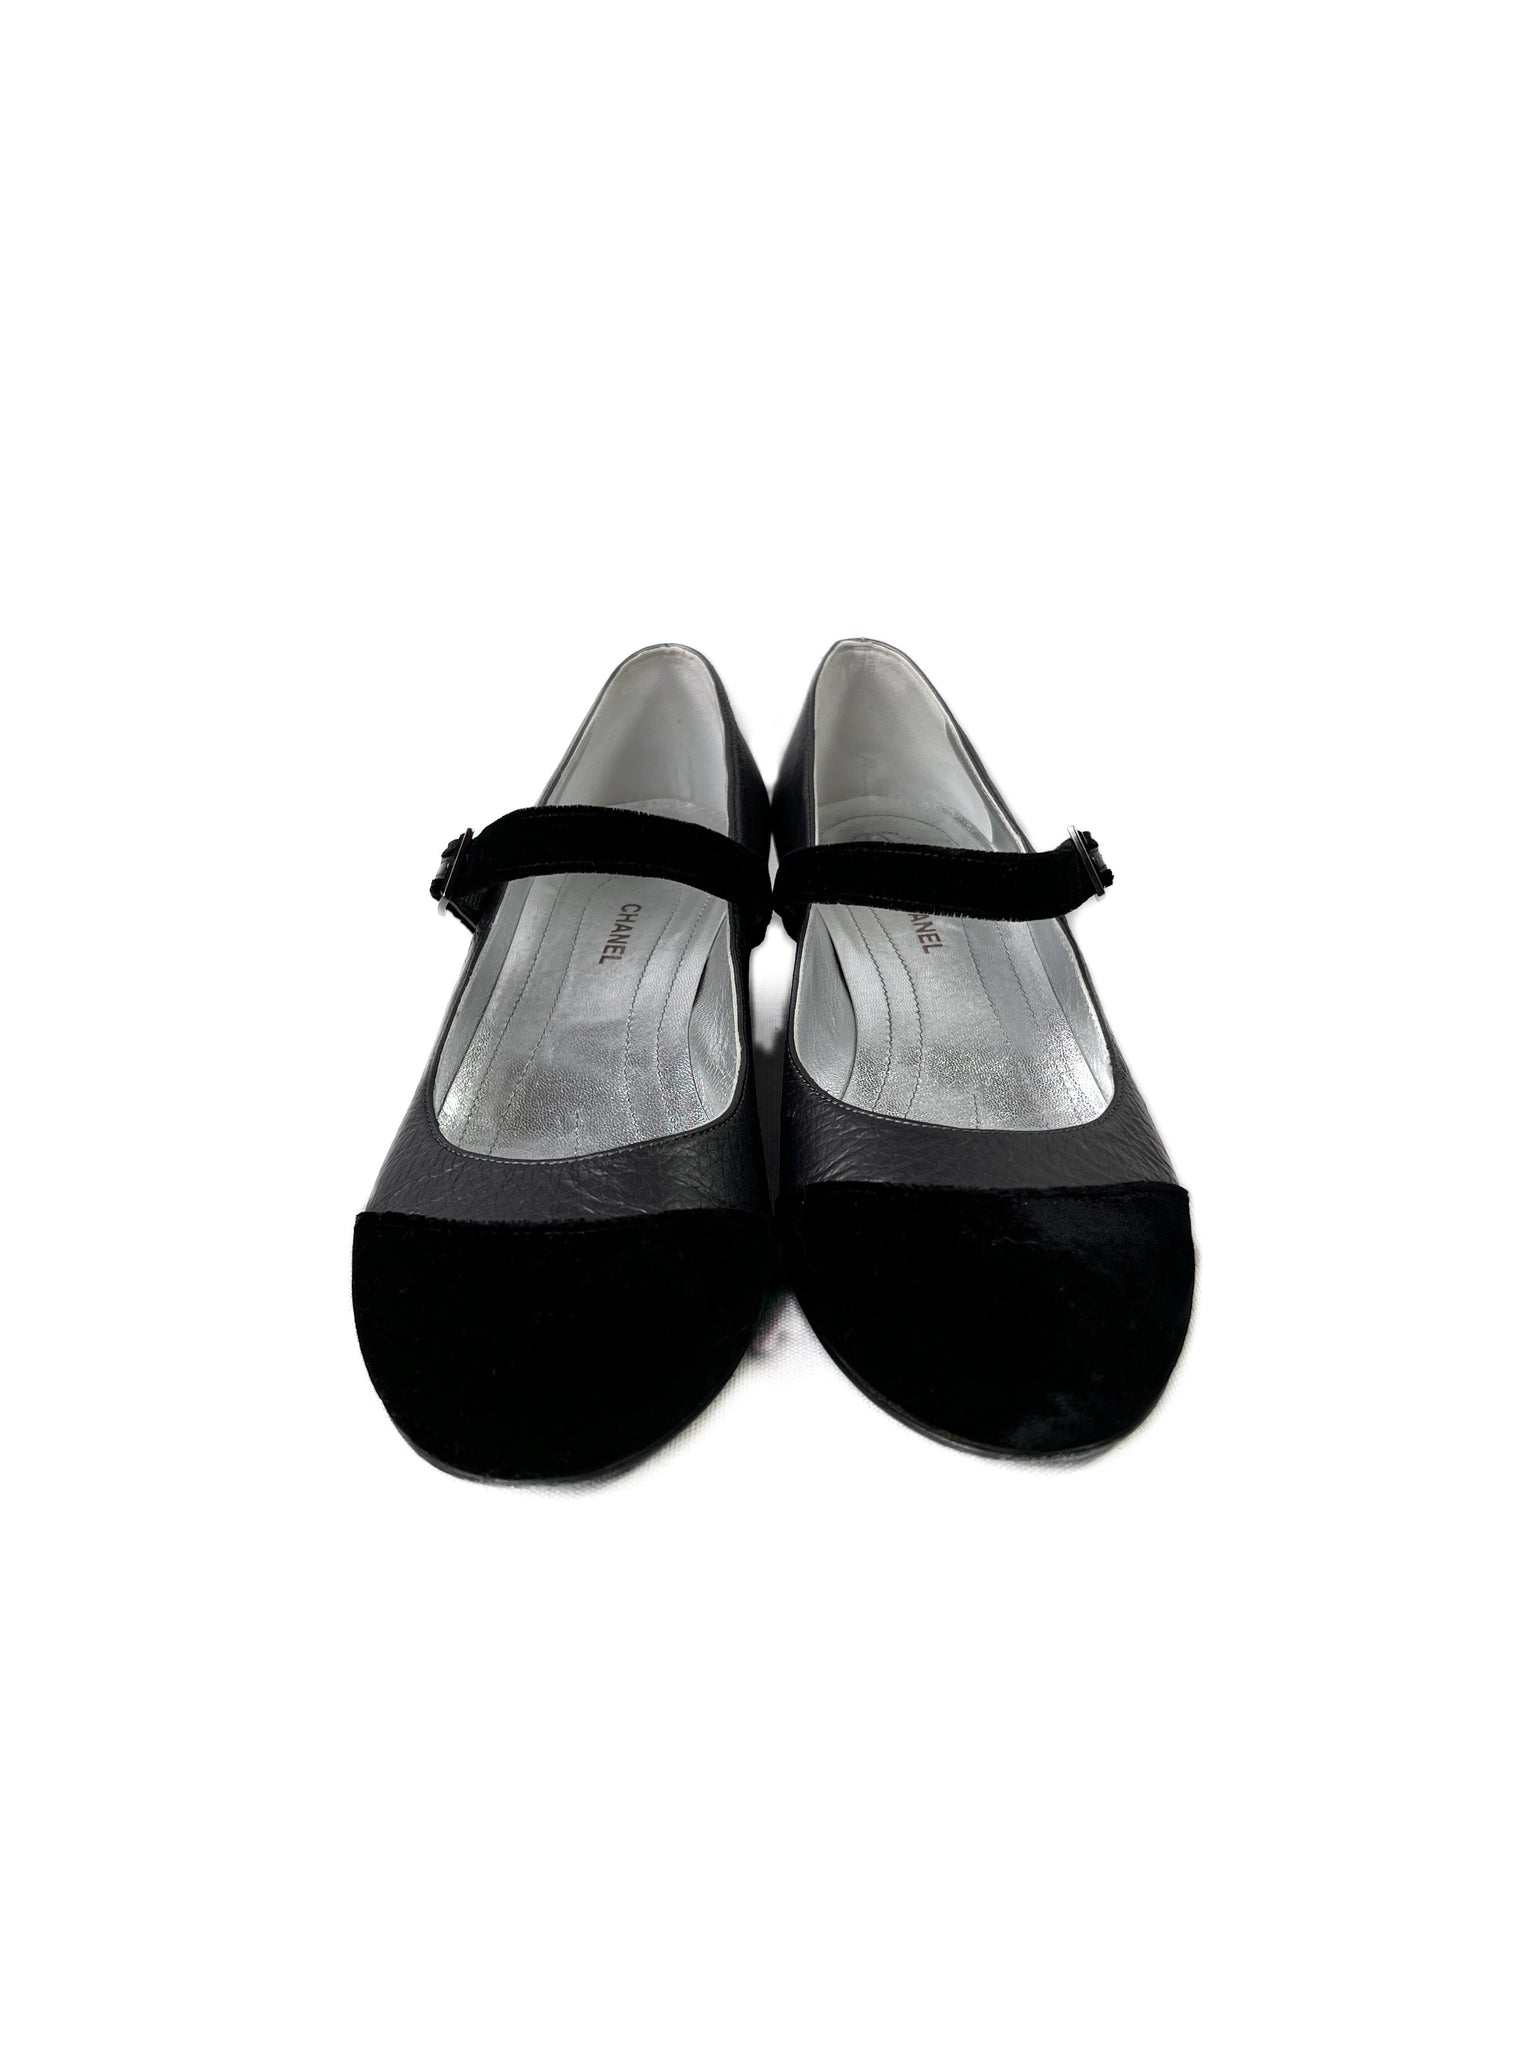 Shop CHANEL MARY JANES